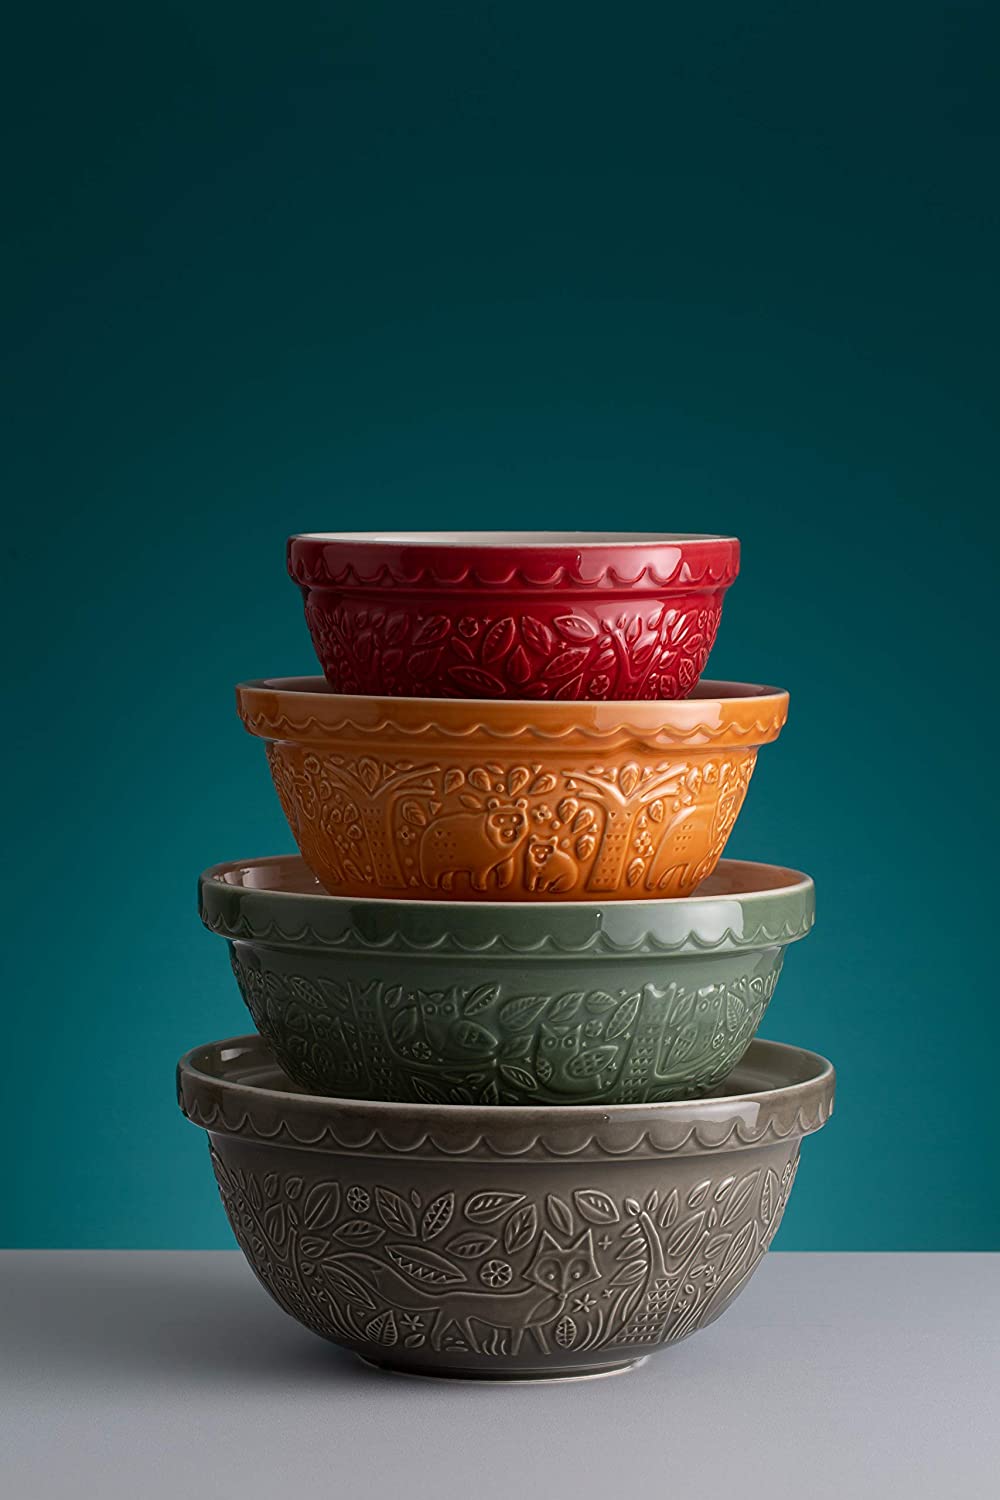 stack of mixing bowls on grey counter with teal background.